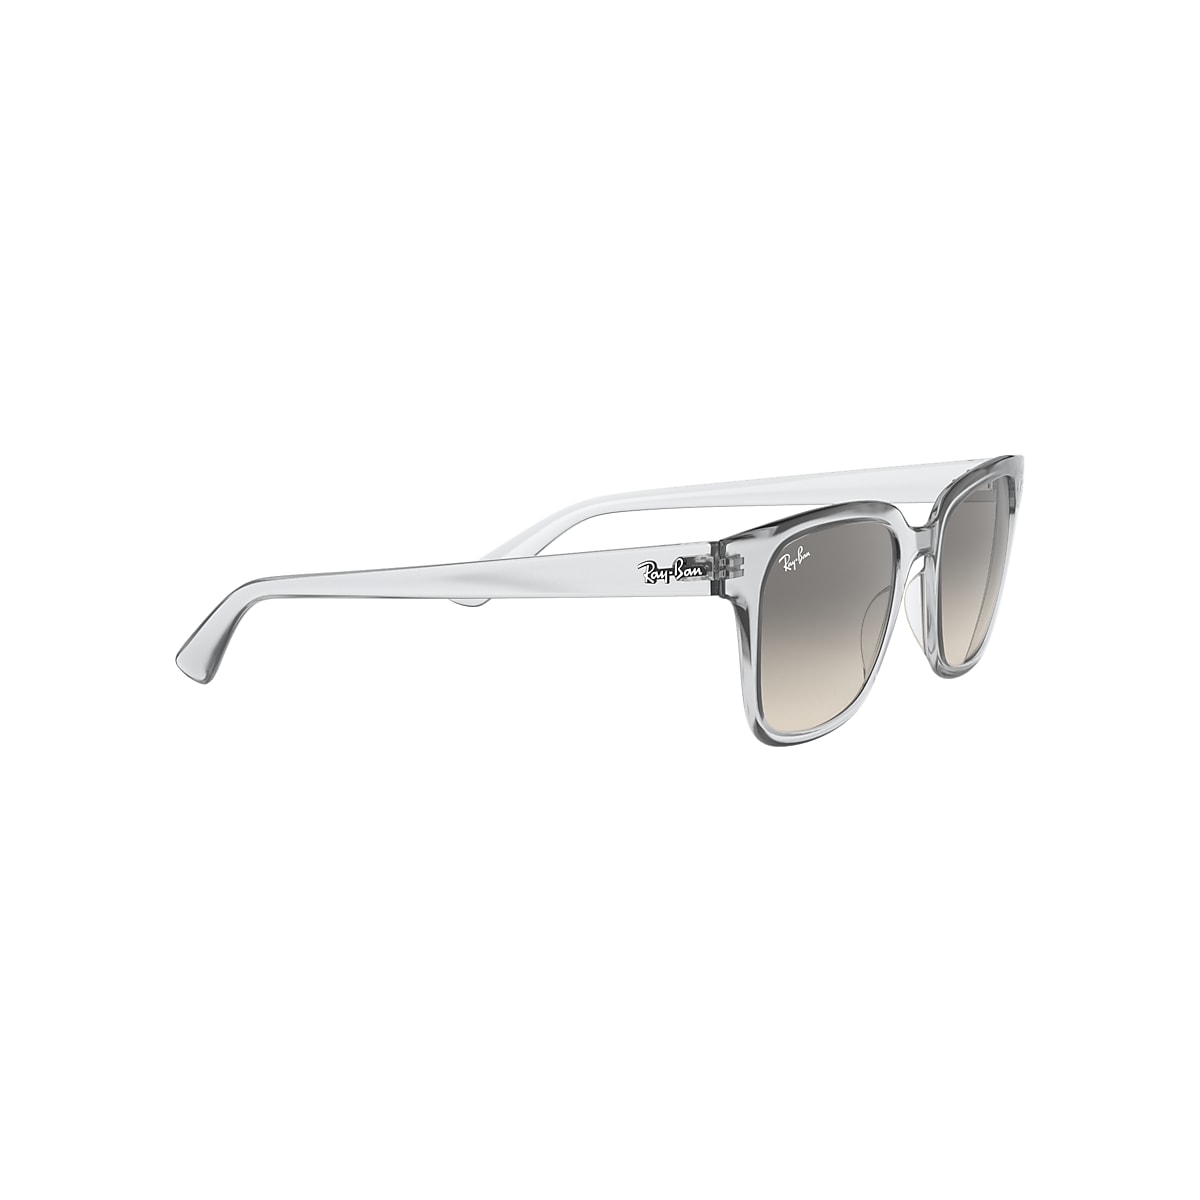 Rb4323 Sunglasses in Transparent and Light Grey | Ray-Ban®